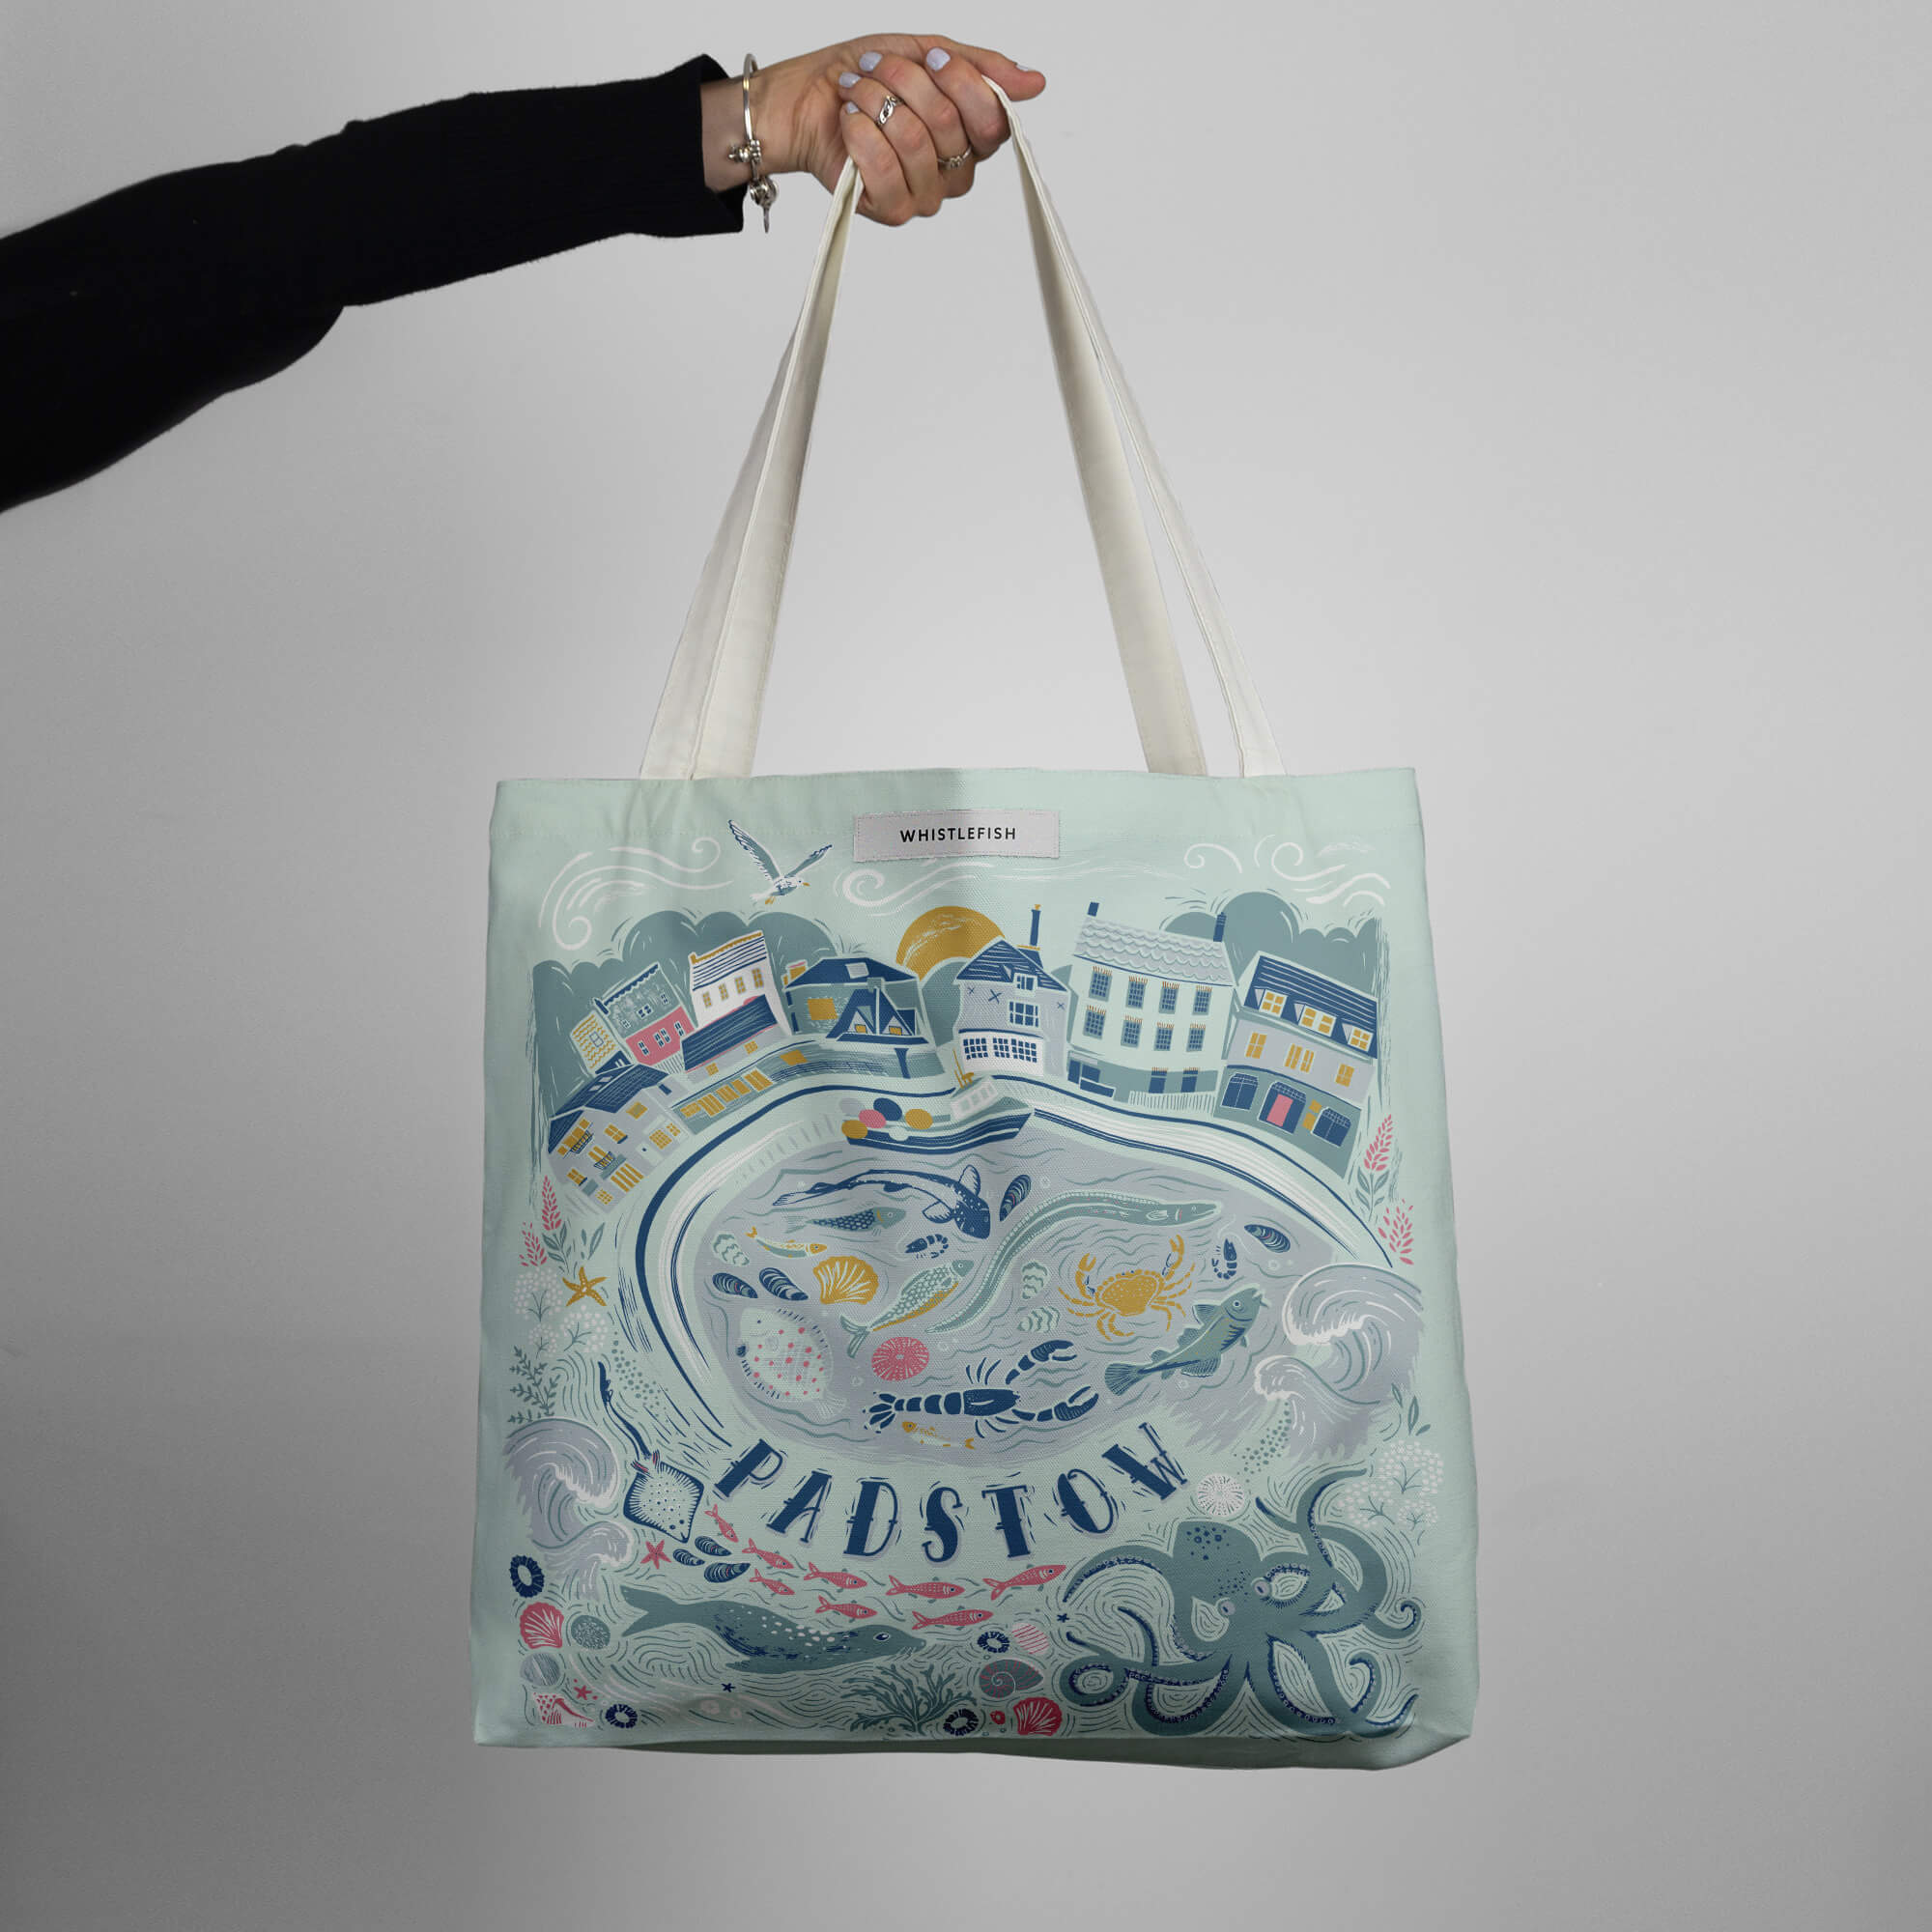 An image of Padstow Tote Bag Whistlefish